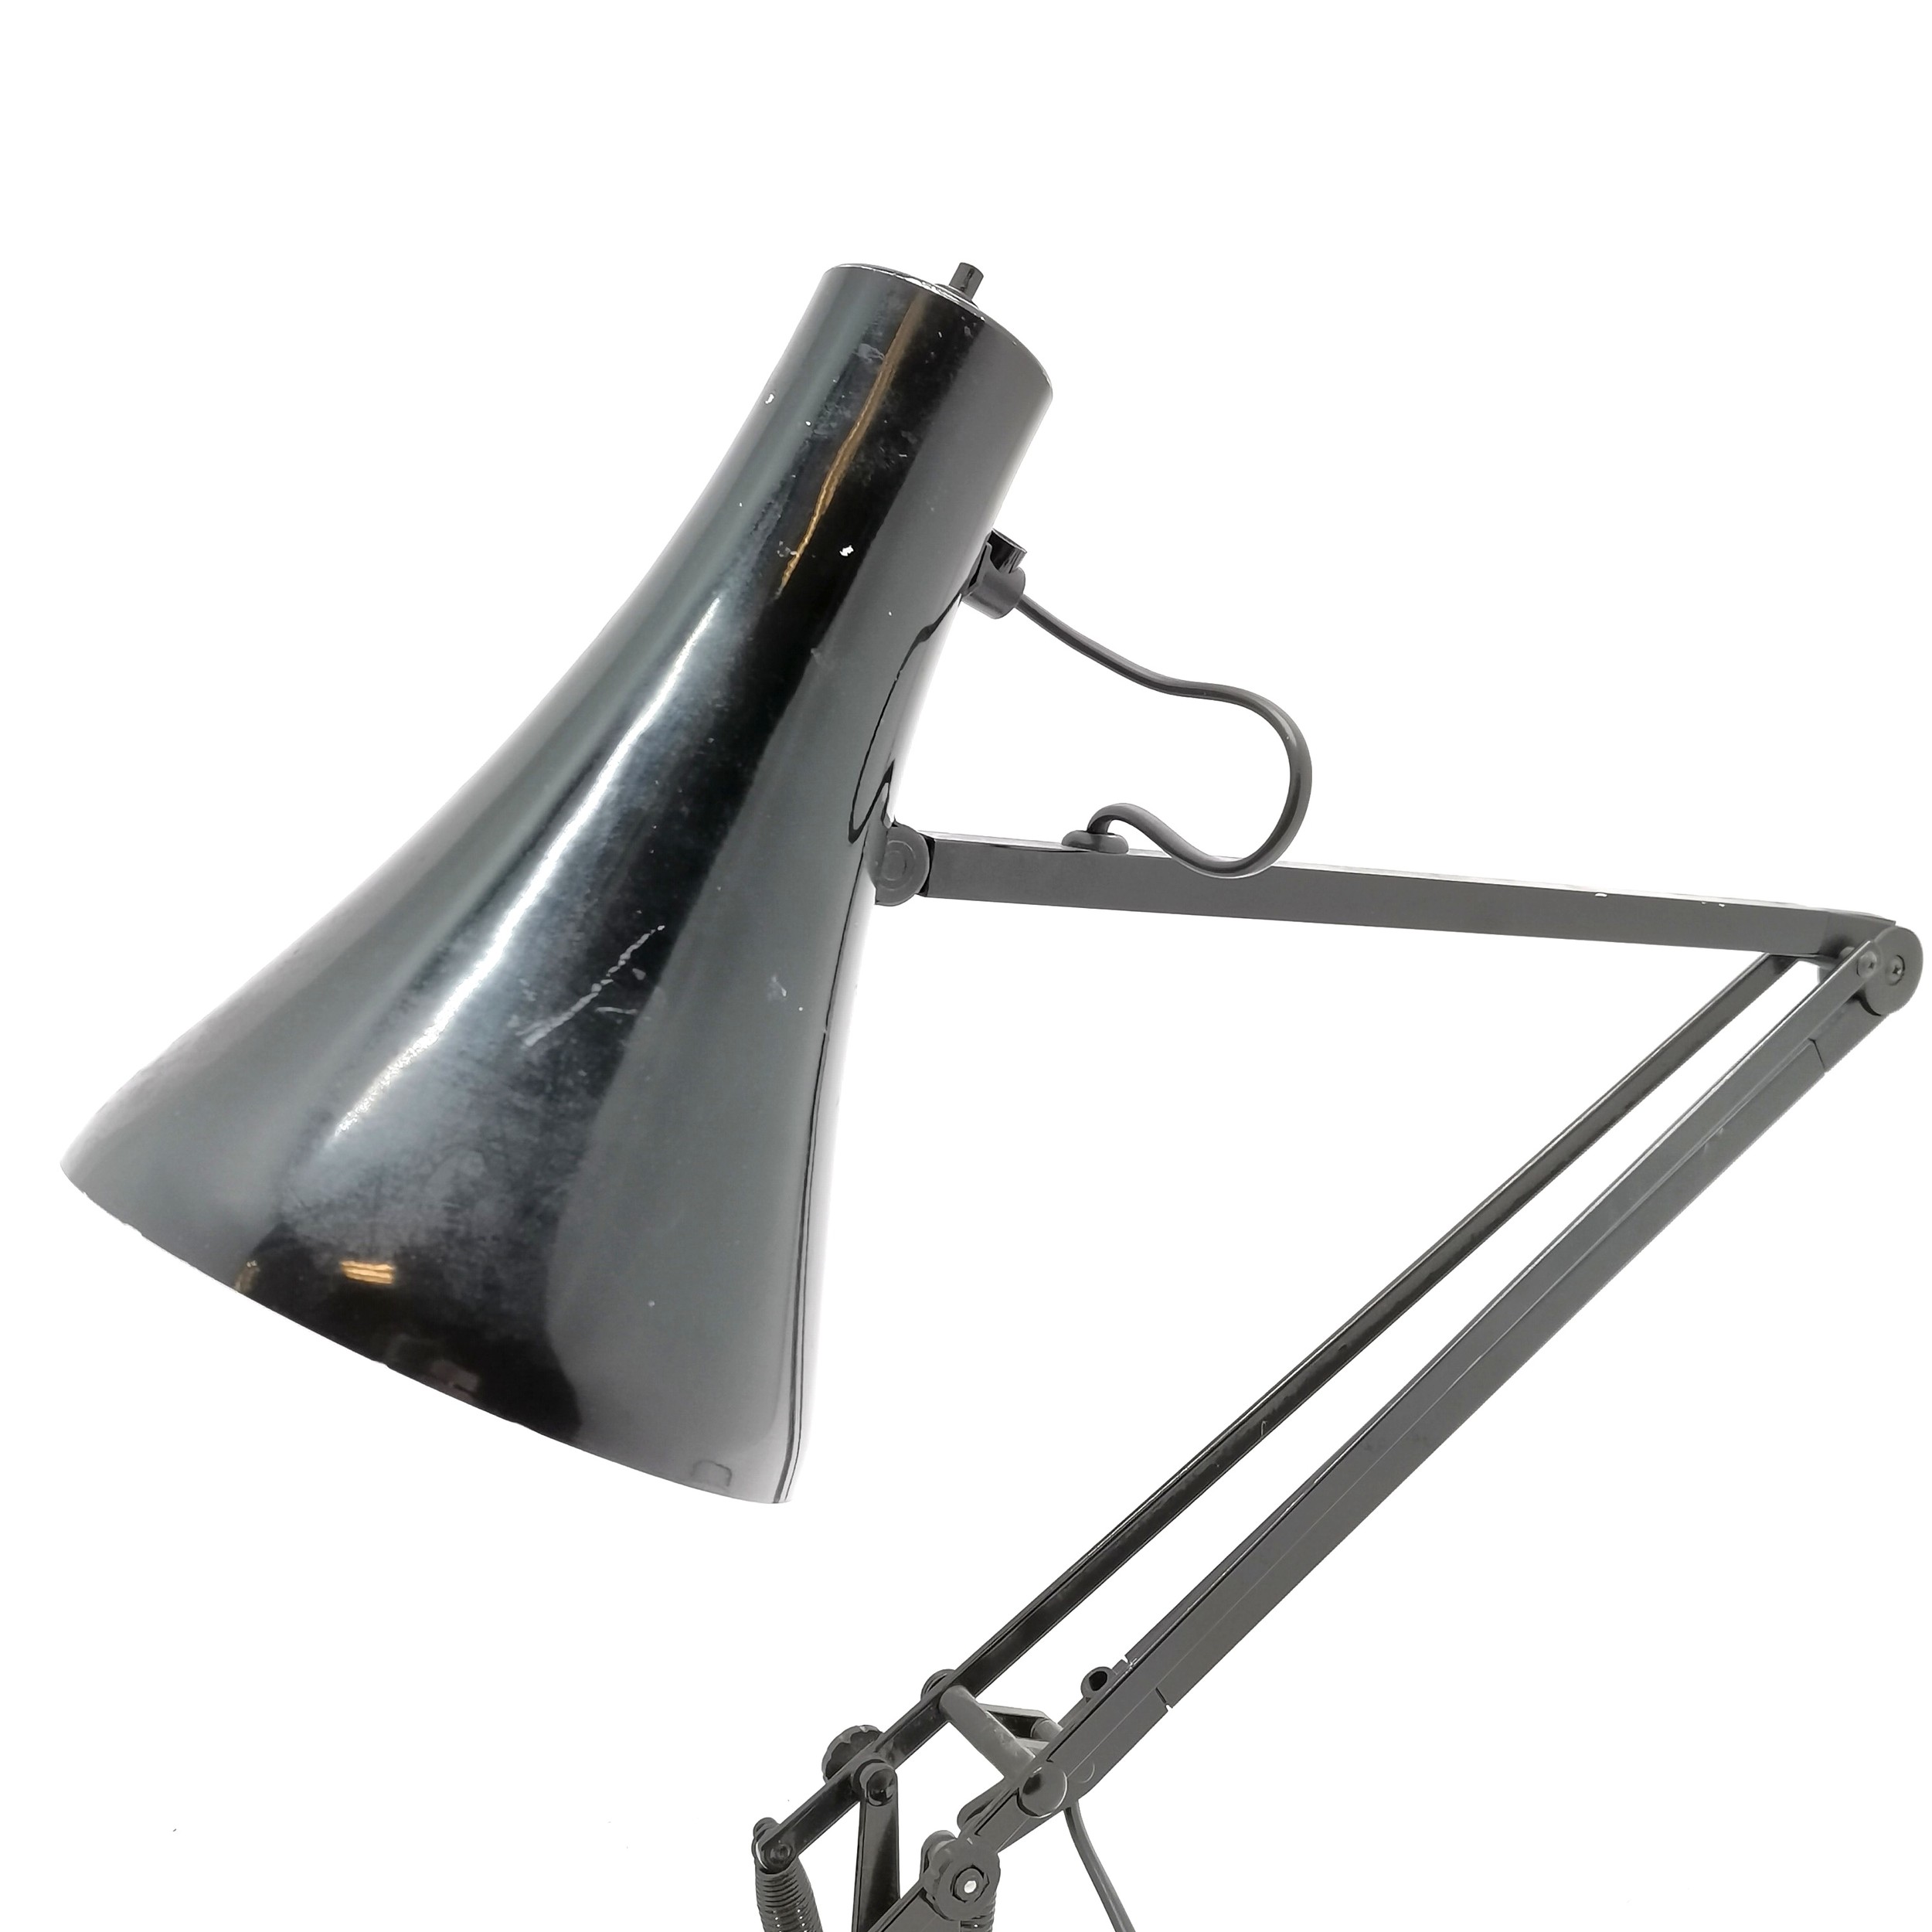 Black Anglepoise lamp - some small losses to the paint finish - Image 2 of 2